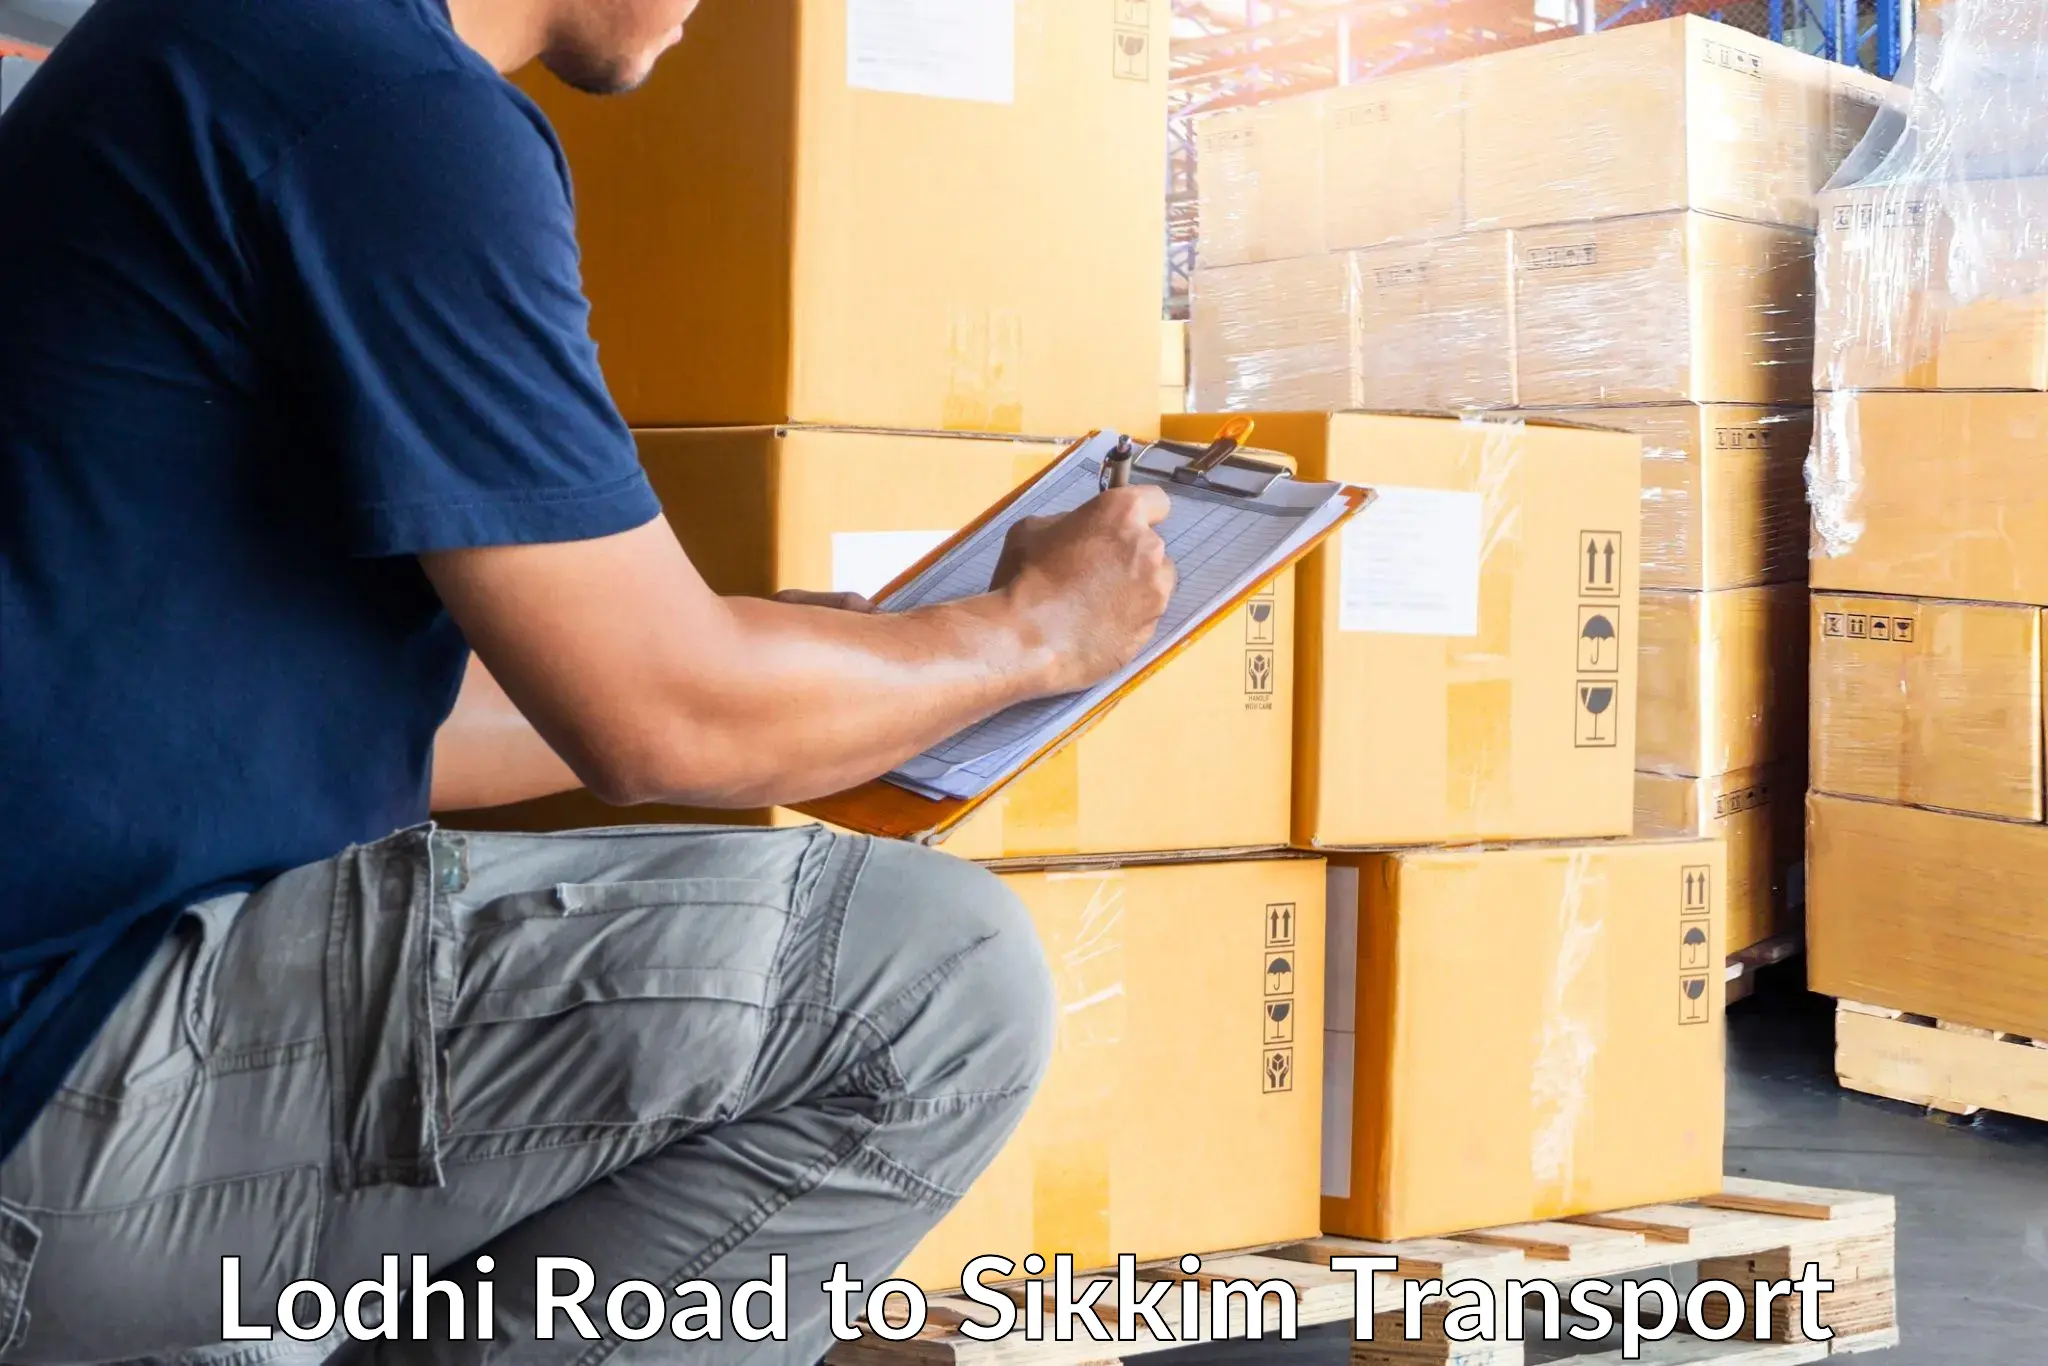 Shipping partner Lodhi Road to South Sikkim